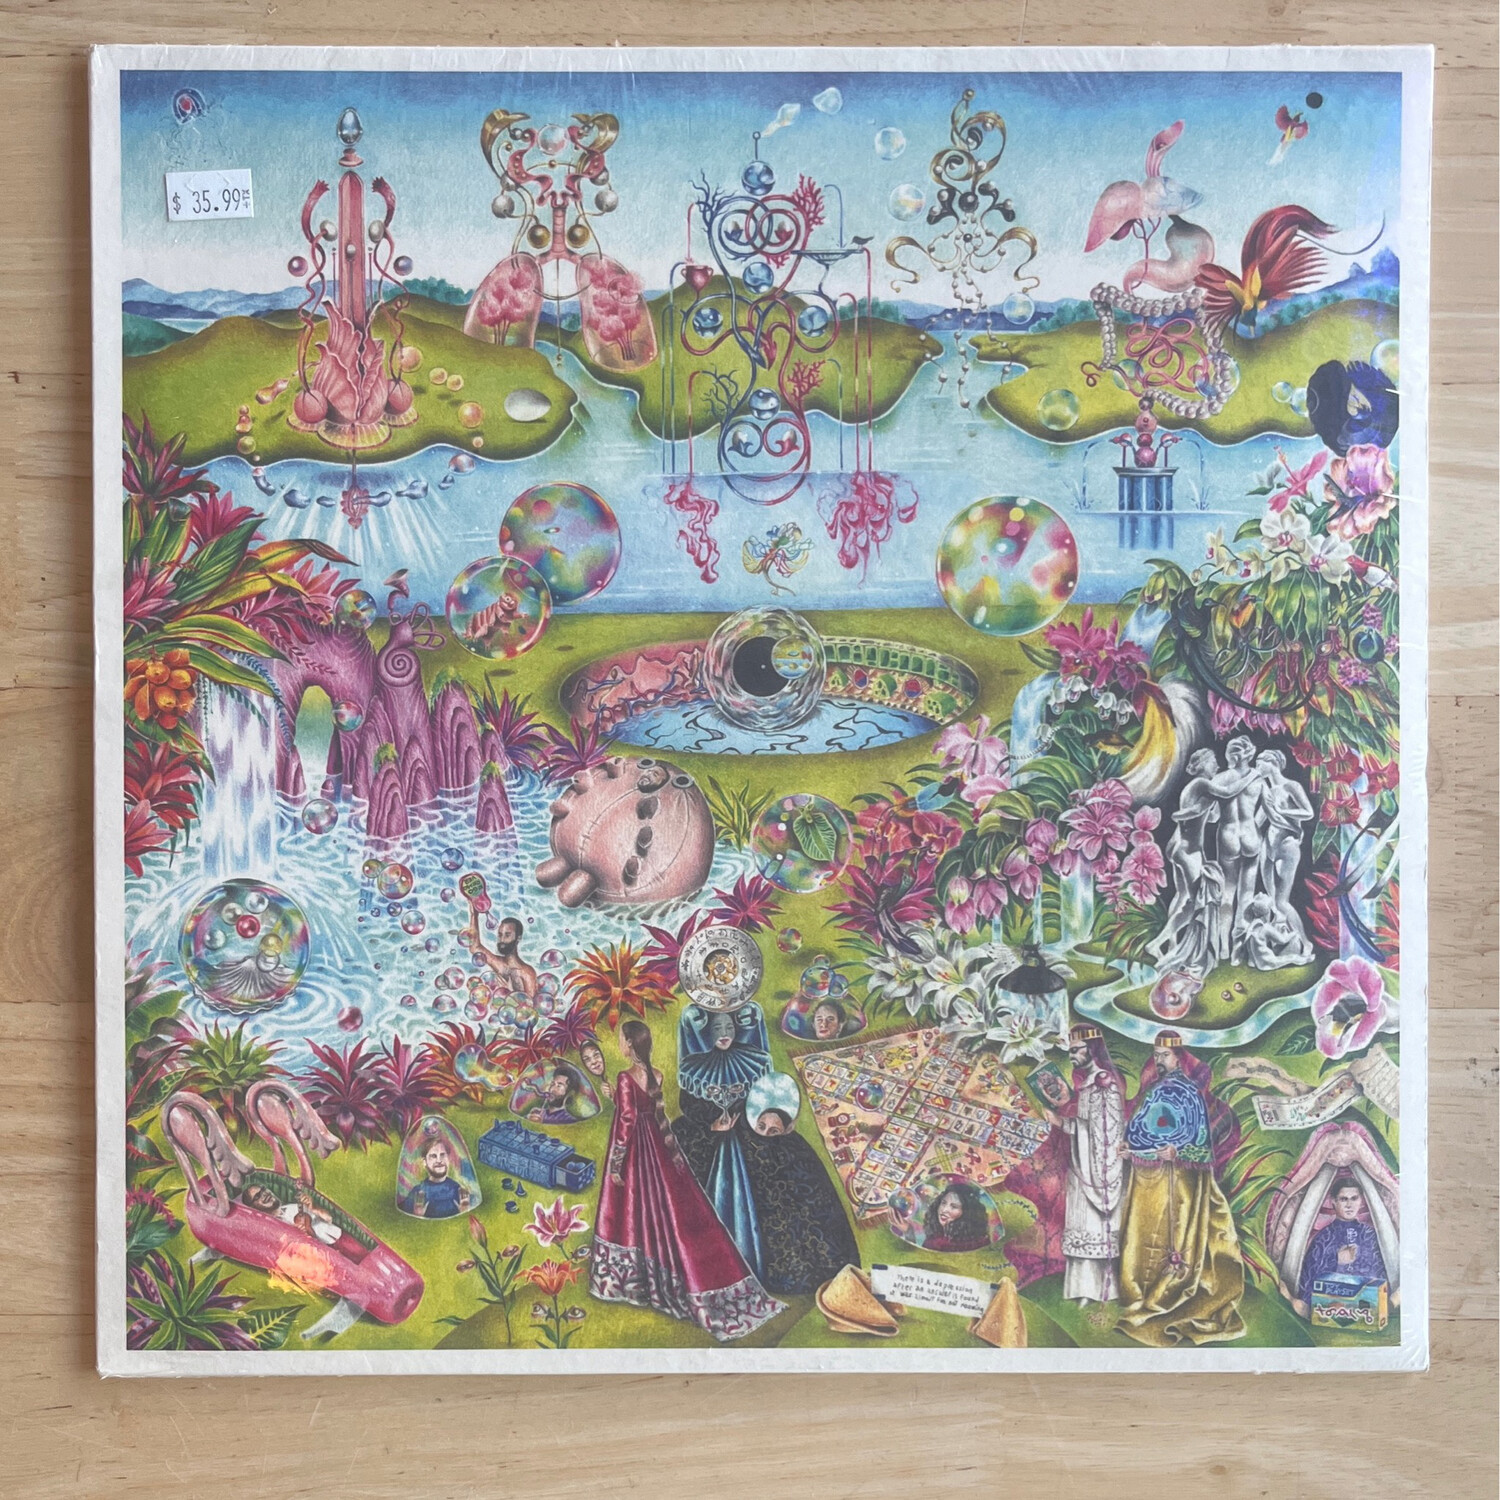 Al Doum and the Faryds "Freaky People" LP